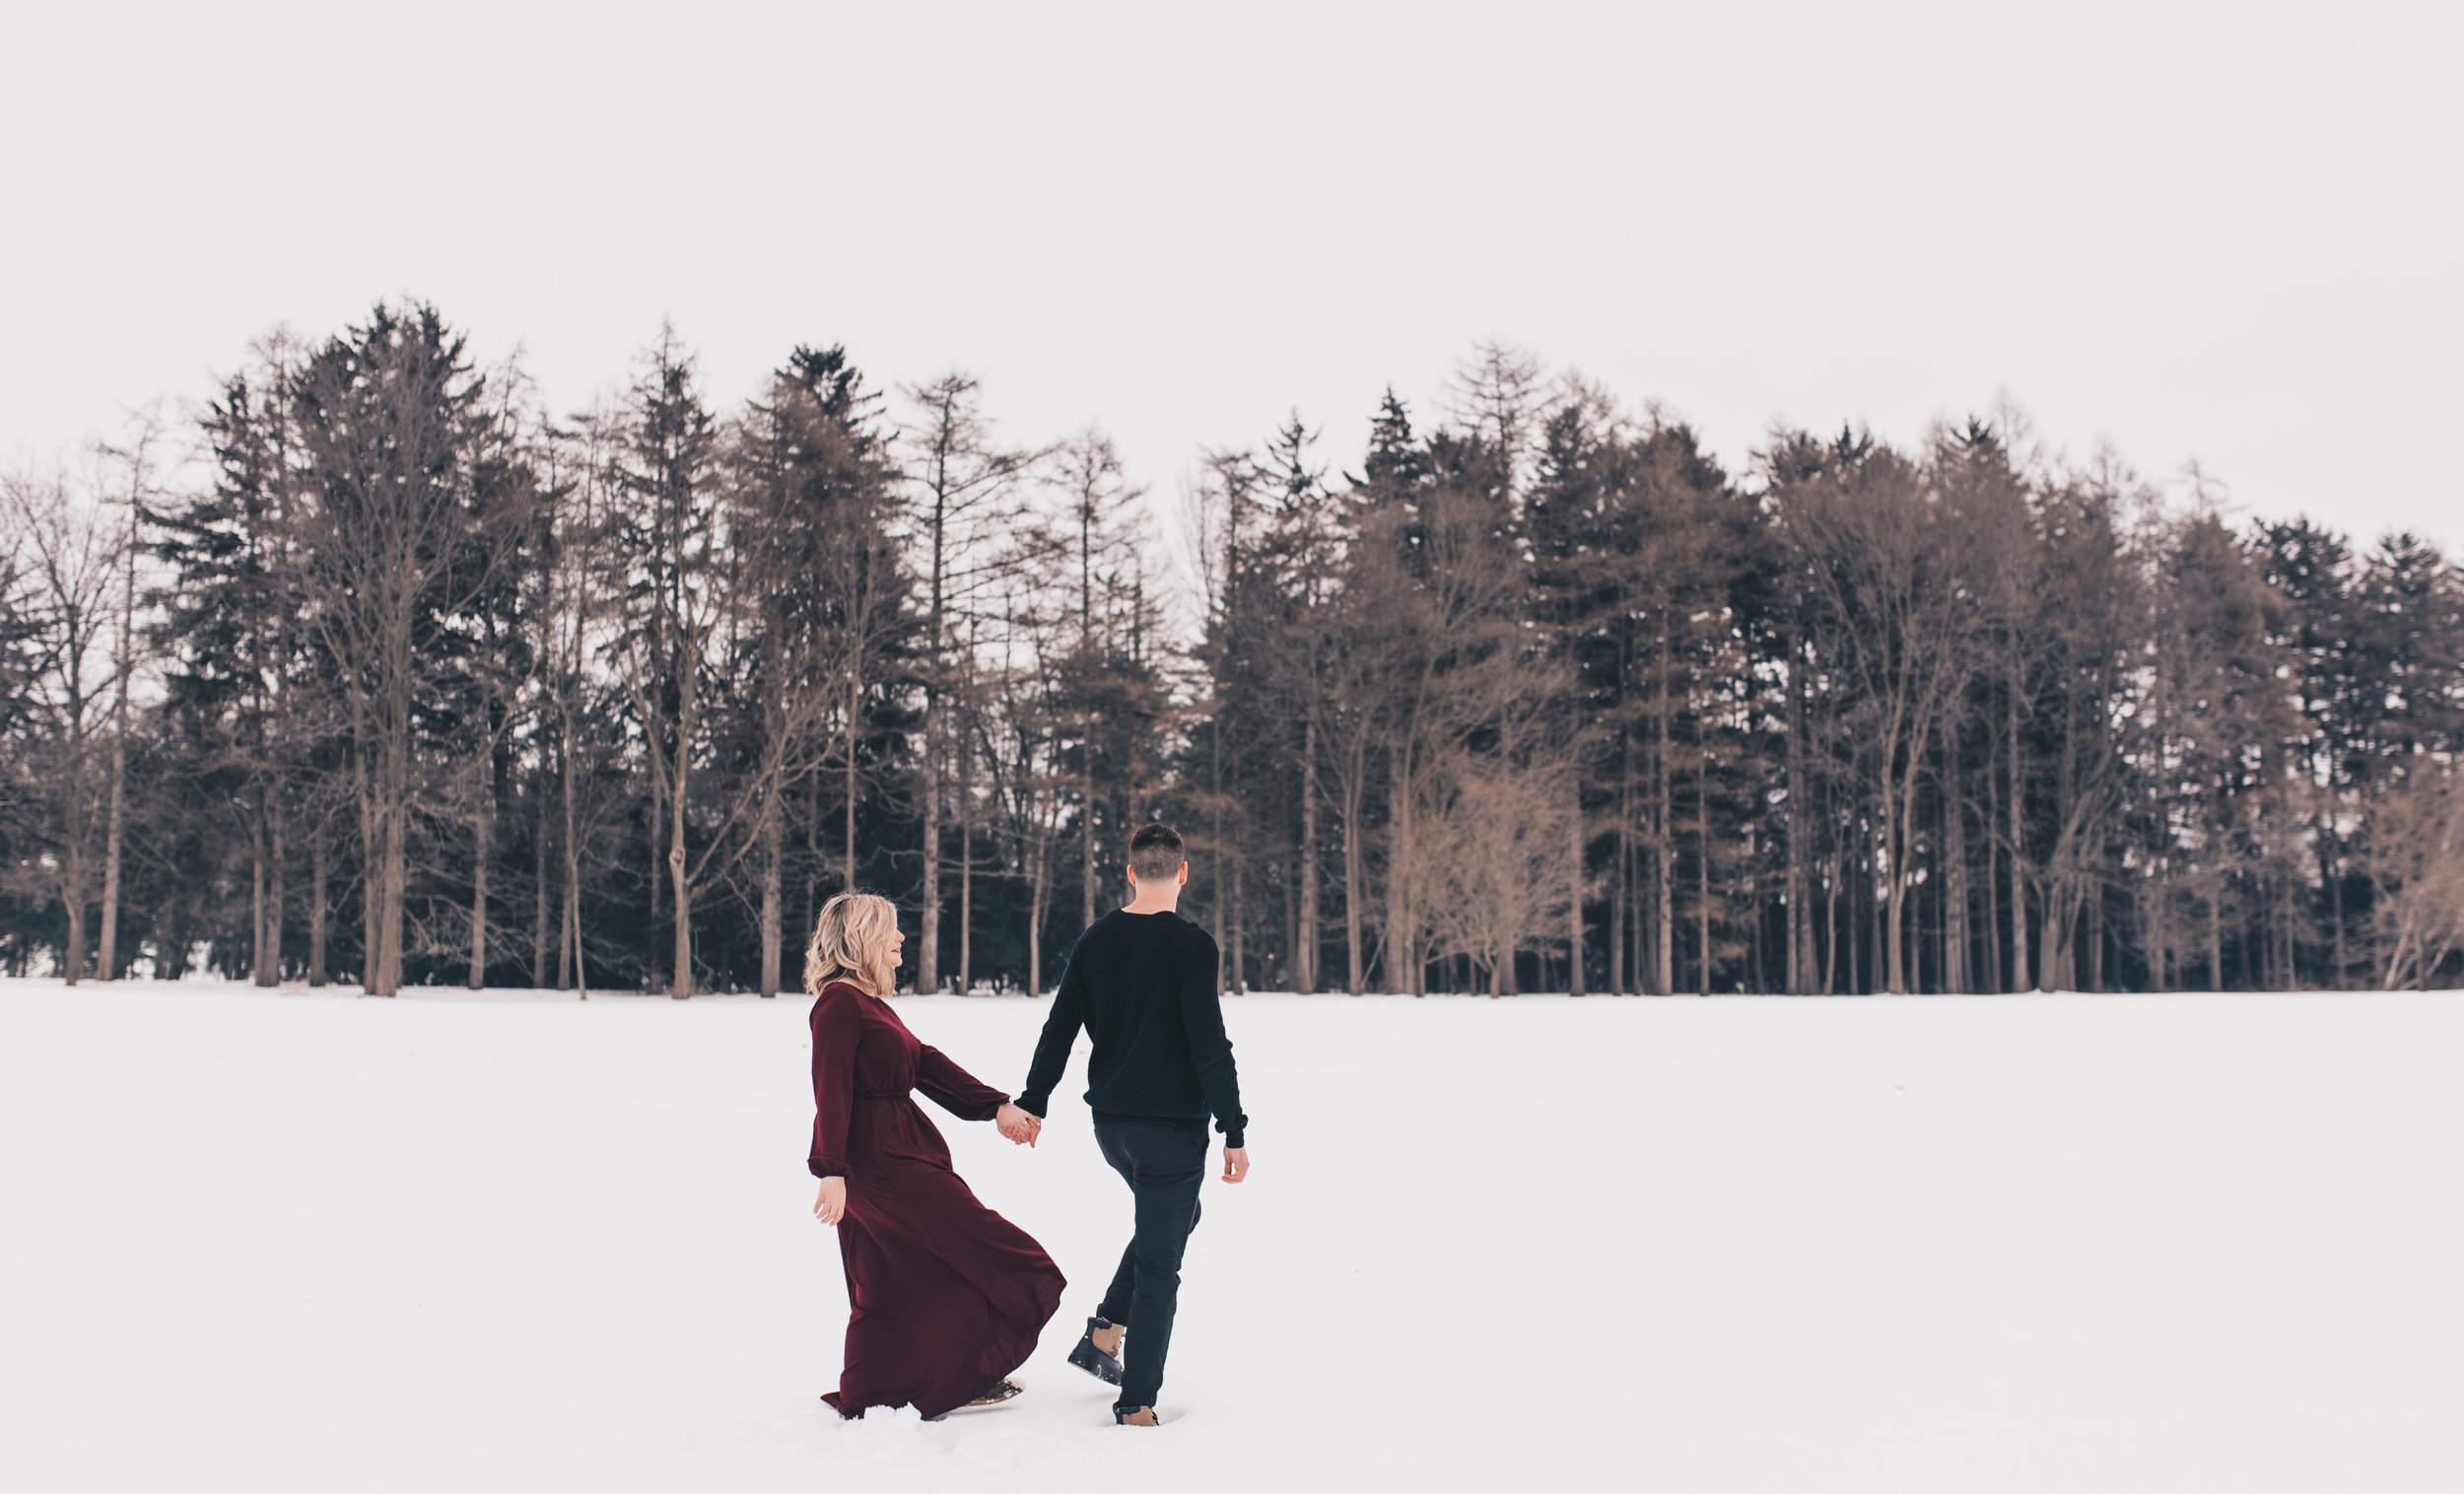 Winter Couples Session, Outdoor Winter Engagement Session, Woodsy Adventurous Couples Session, Illinois Wedding Photographer, Illinois Couples Photographer, Illinois Engagement Photographer